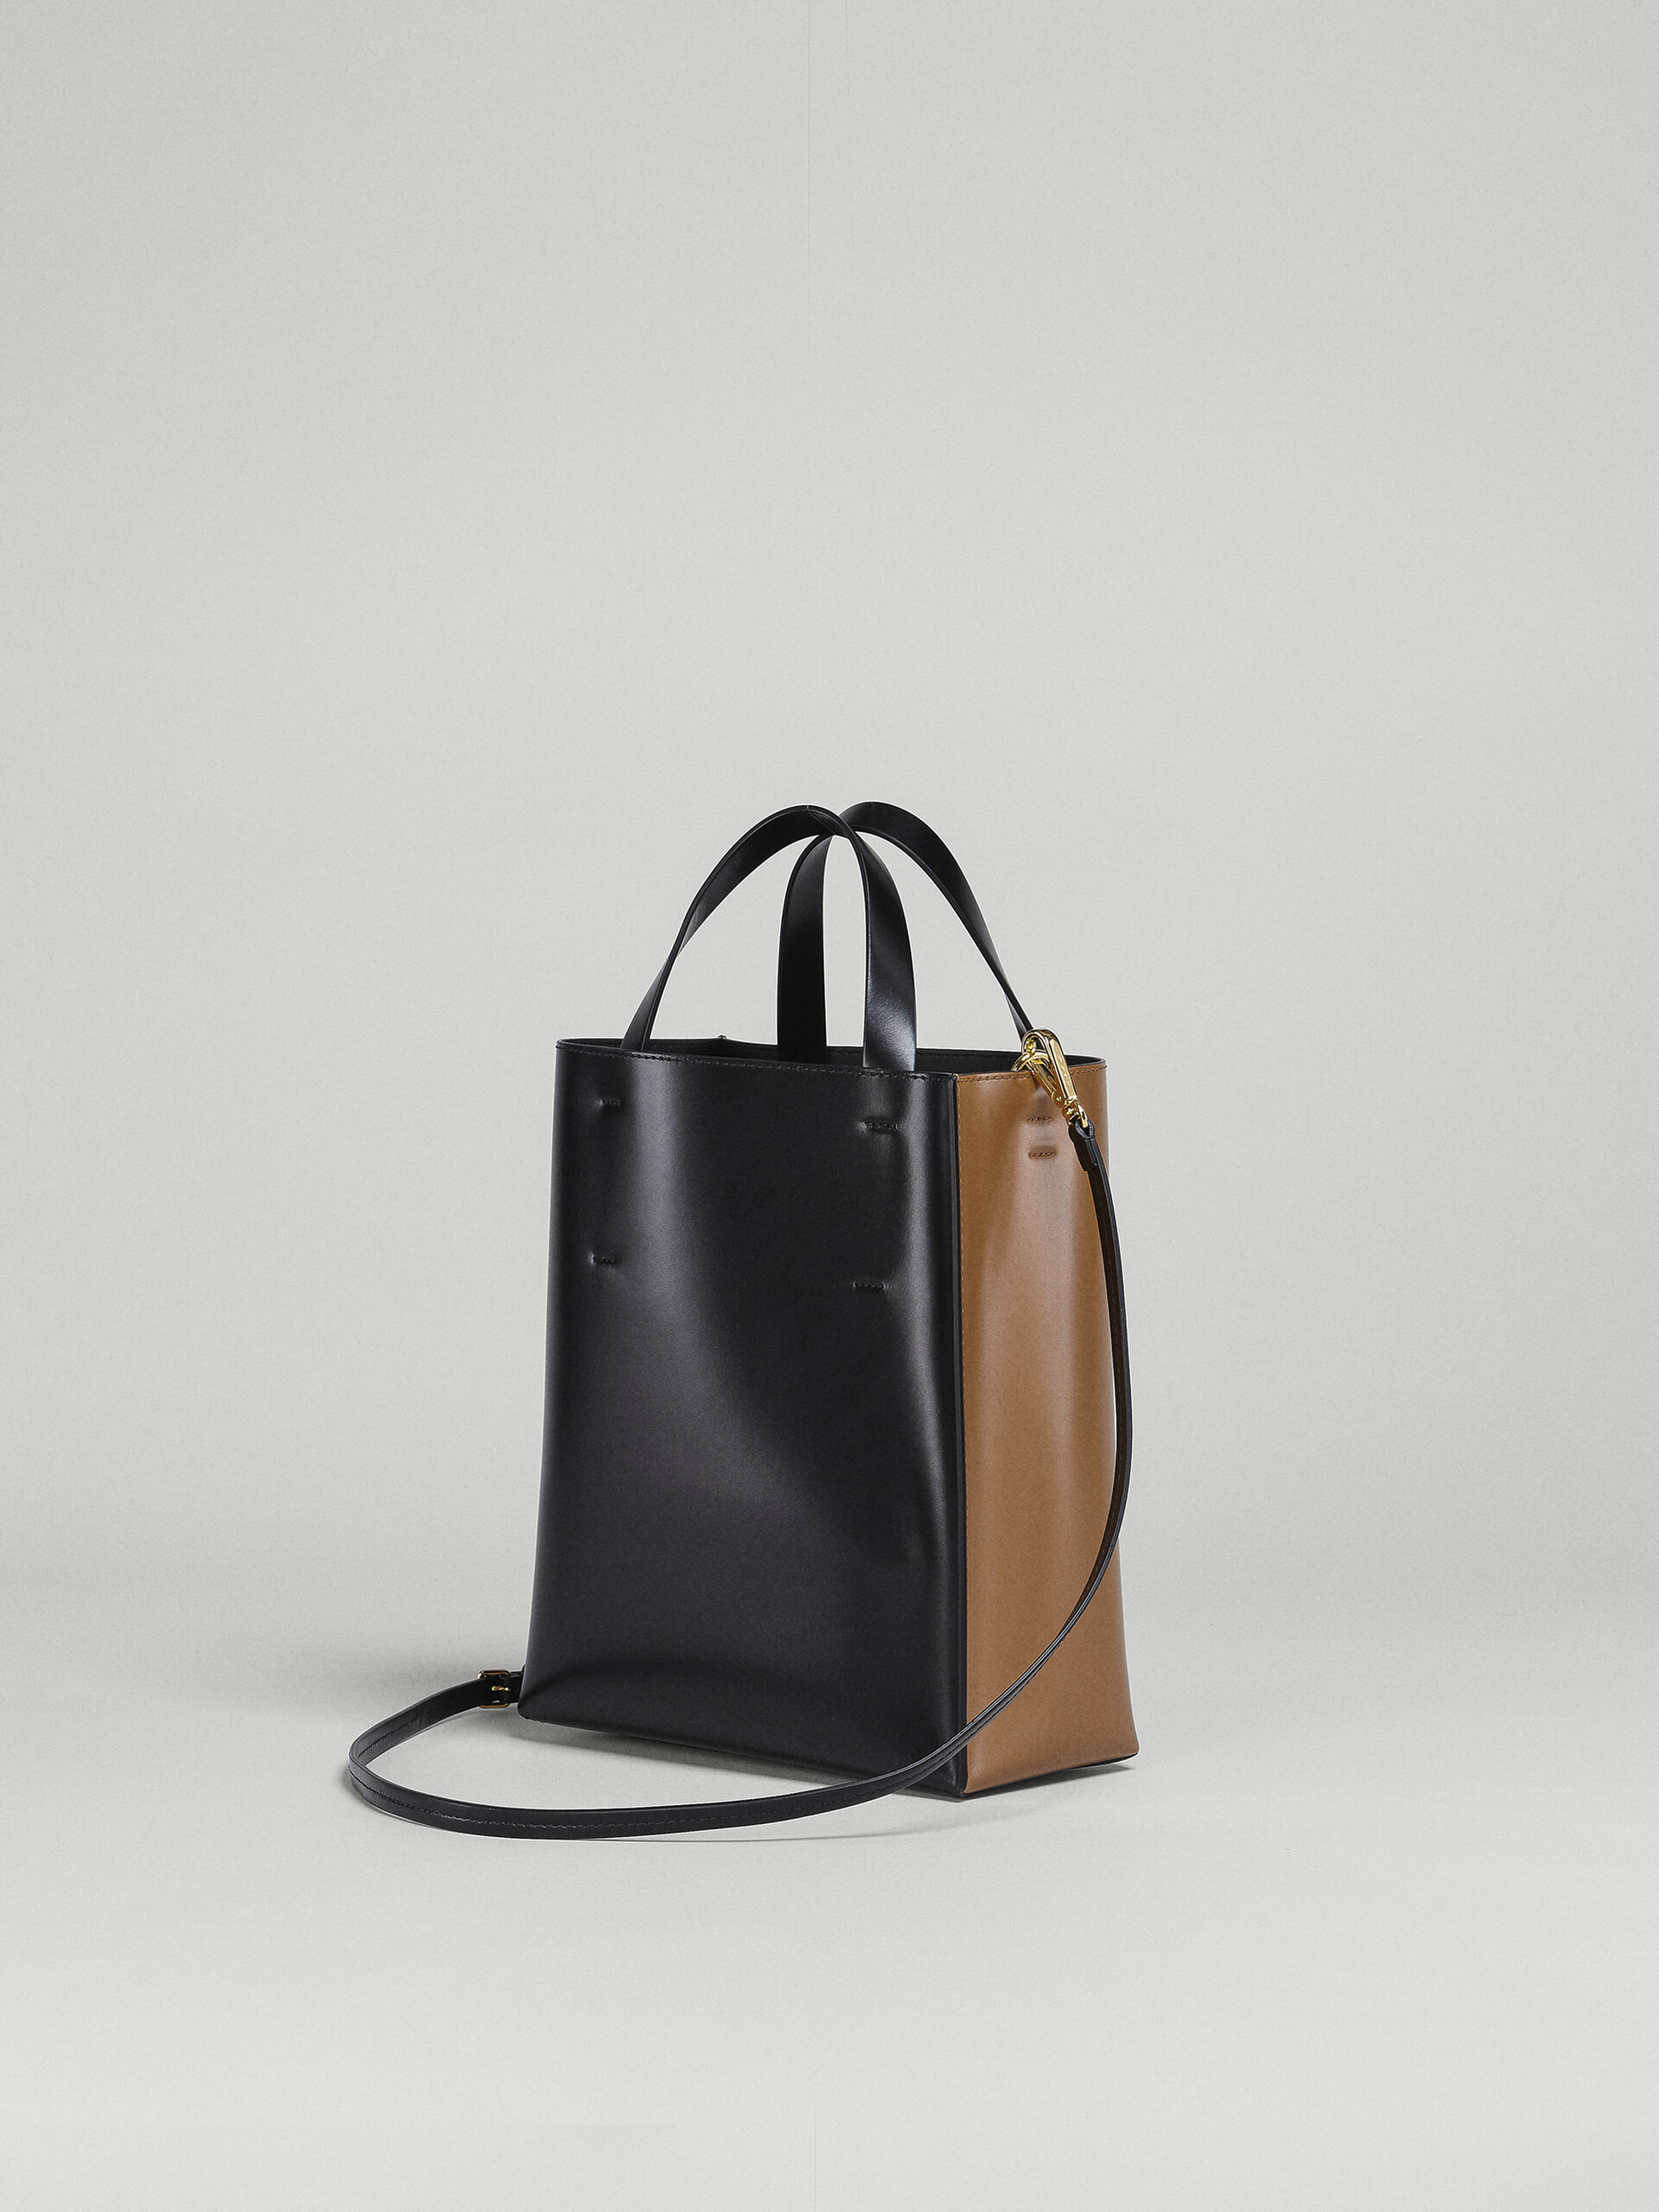 White and black calf leather small MUSEO tote bag - Shopping Bags - Image 3